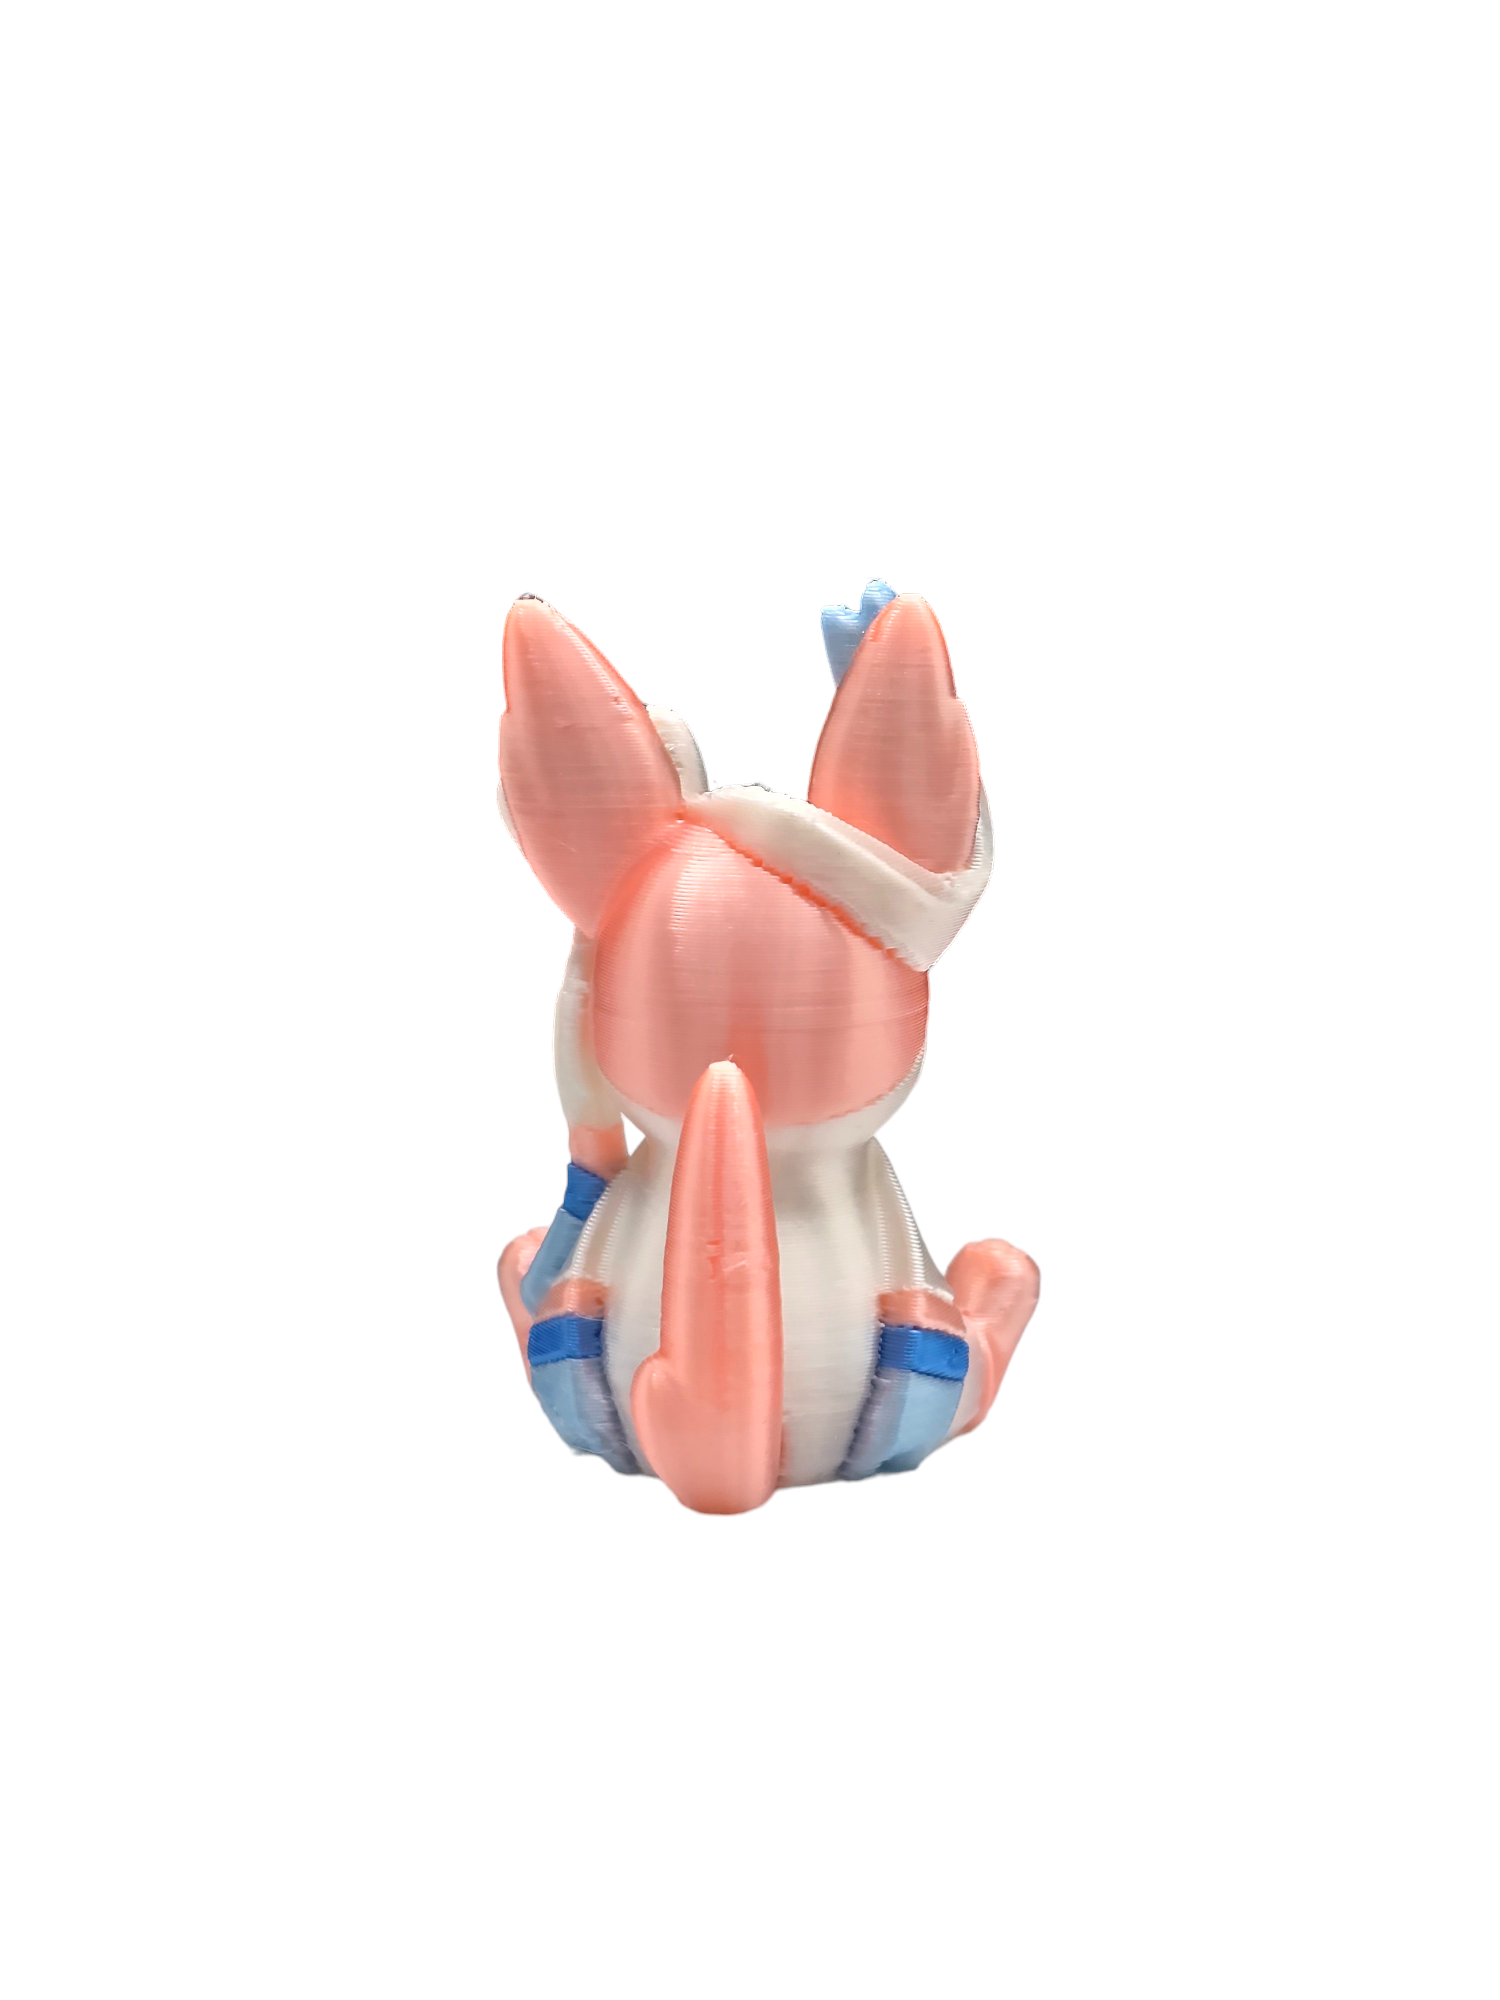 a pink and blue toy animal sitting on top of a white surface